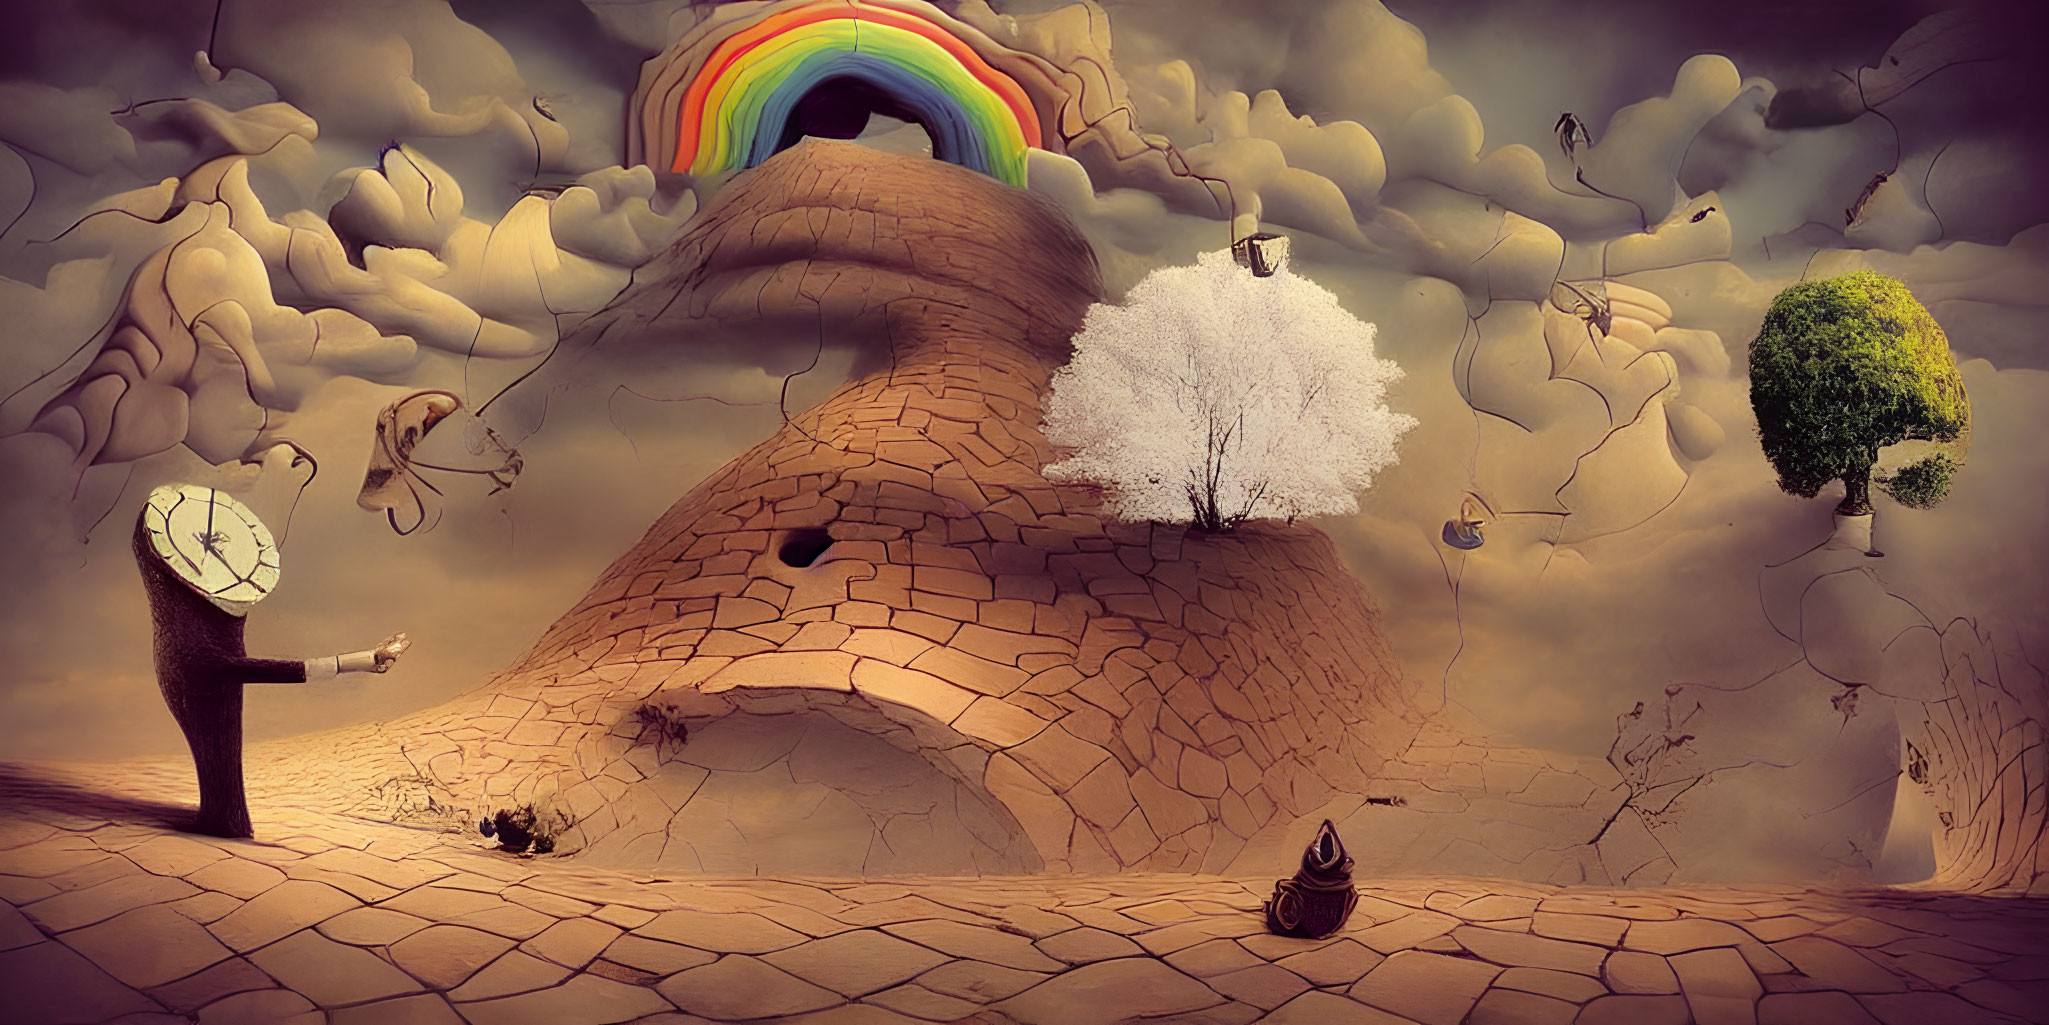 Twisted, cracking terrain with melting clock, rainbow, and whimsical elements